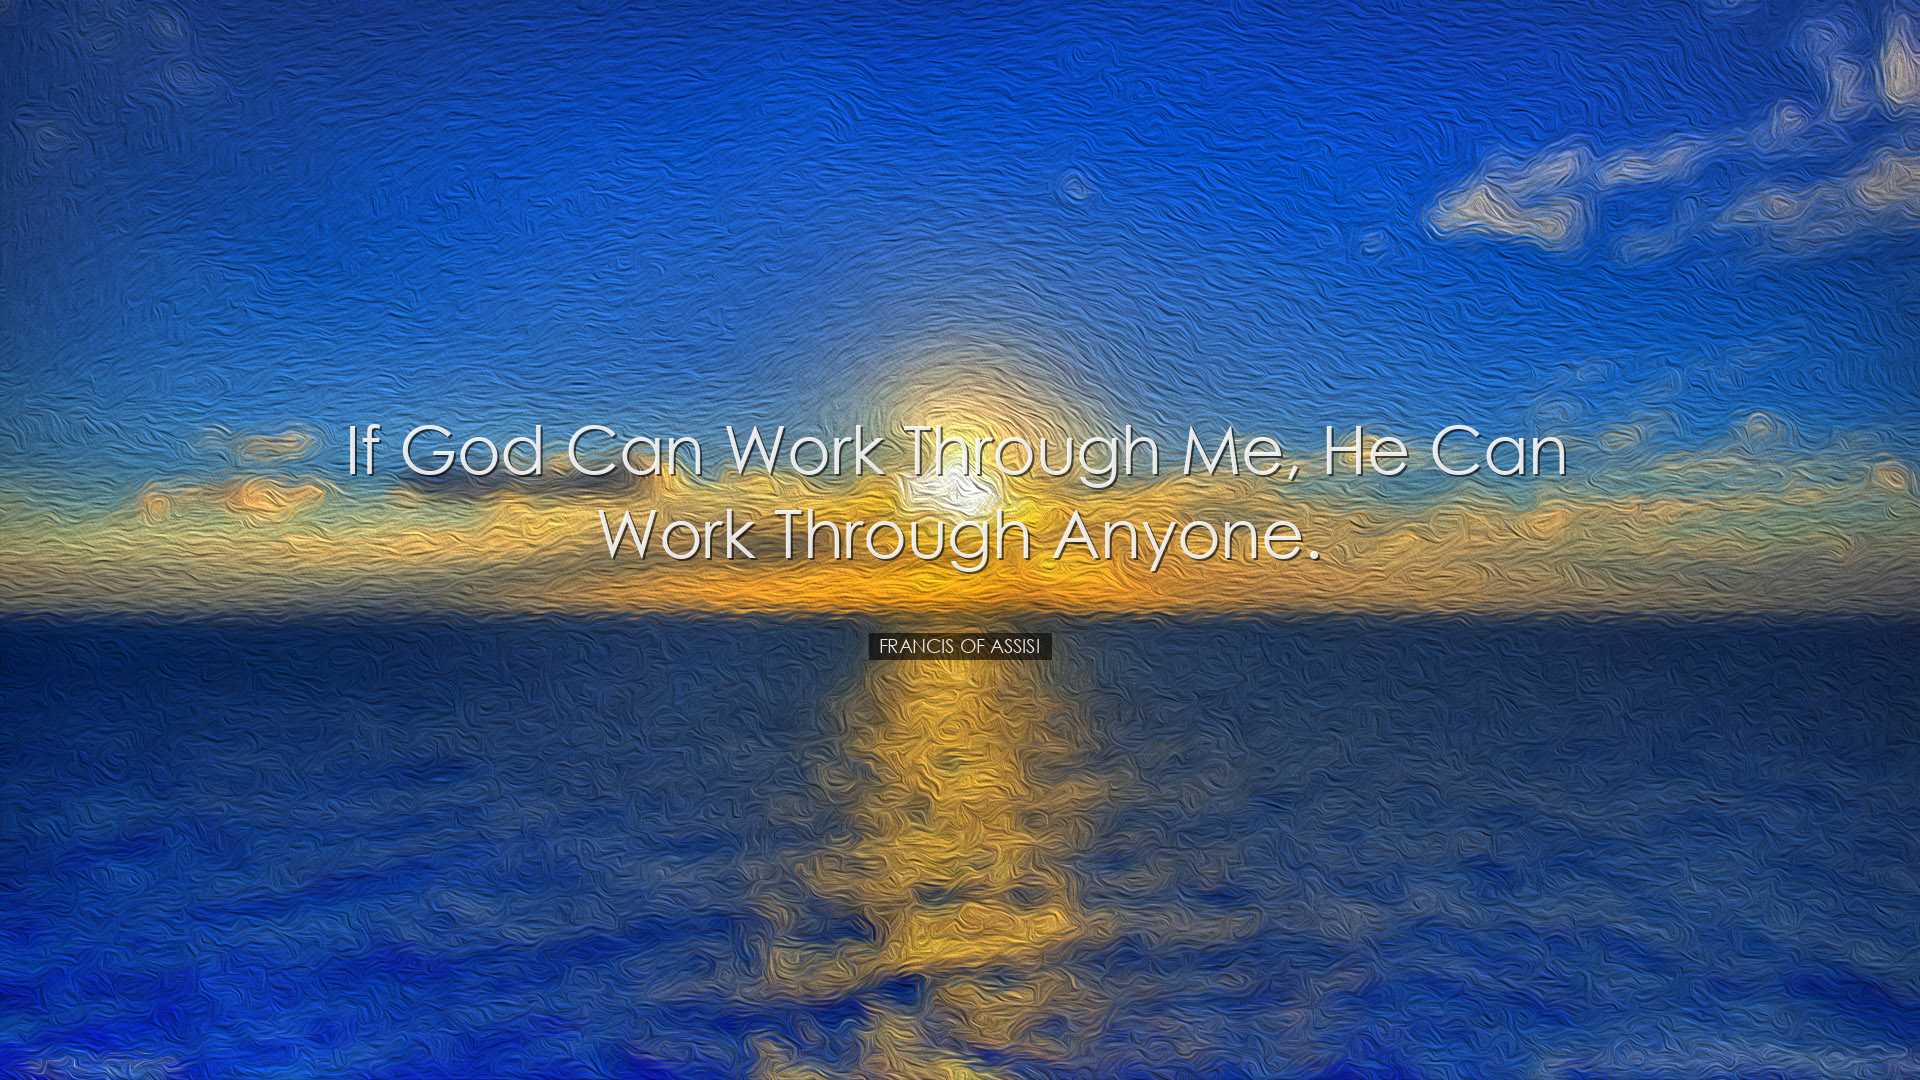 If God can work through me, he can work through anyone. - Francis